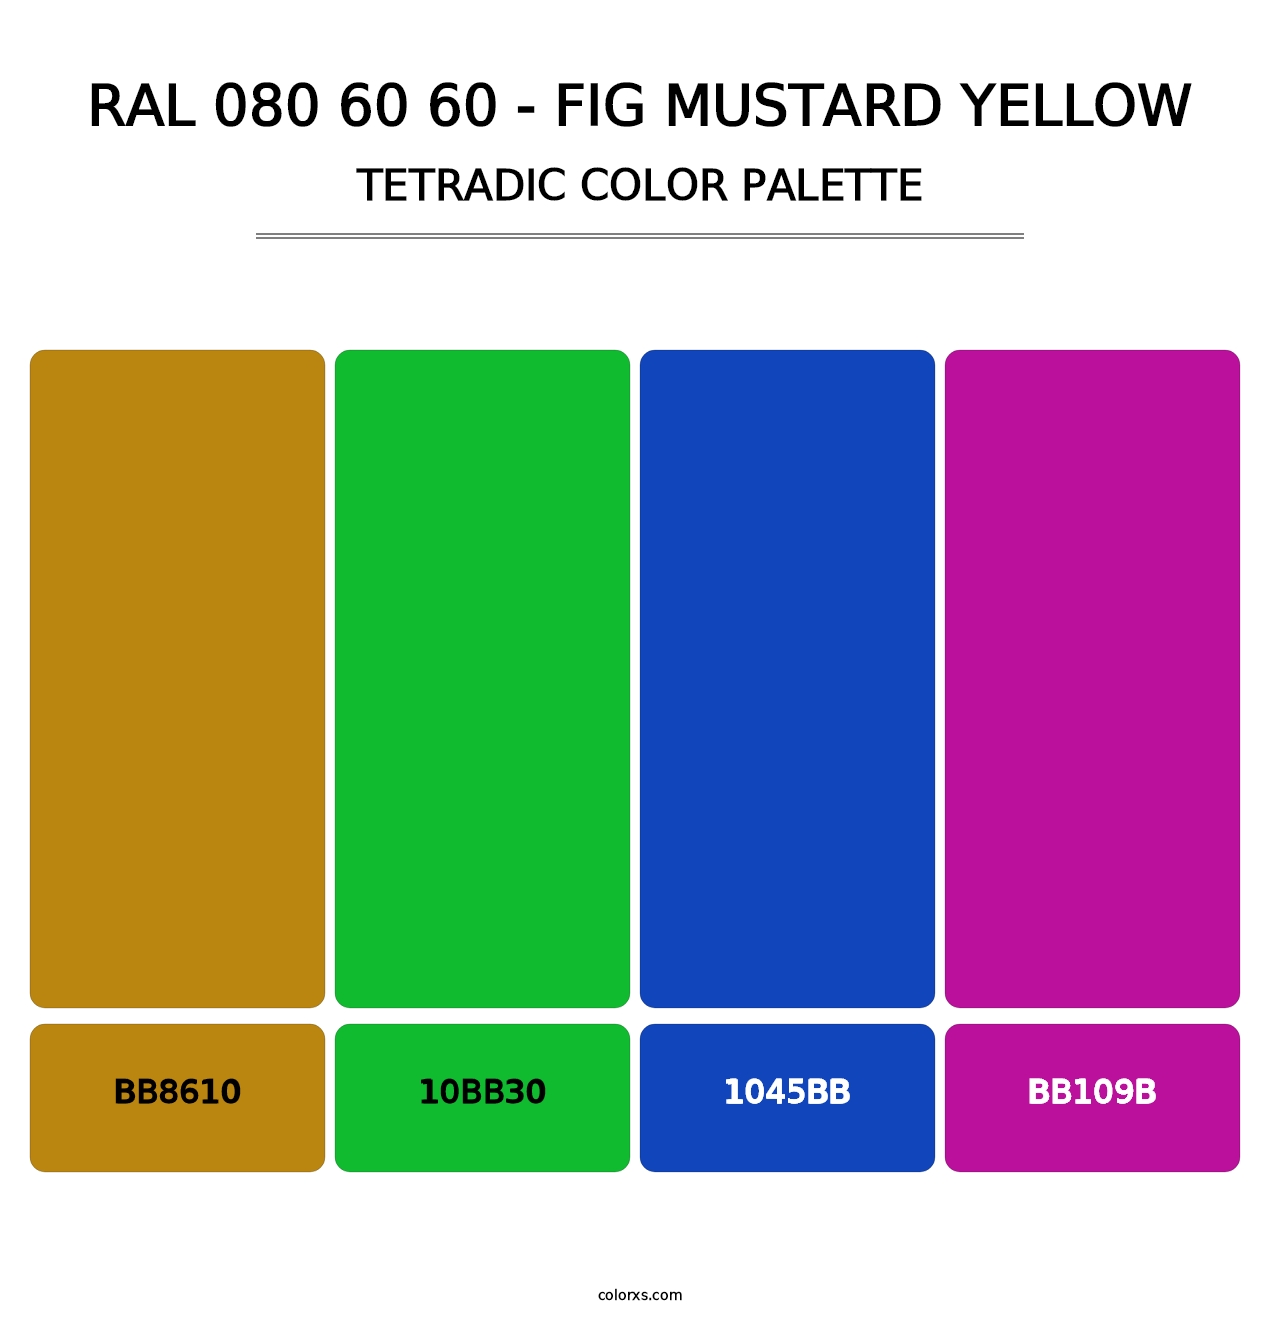 RAL 080 60 60 - Fig Mustard Yellow - Tetradic Color Palette